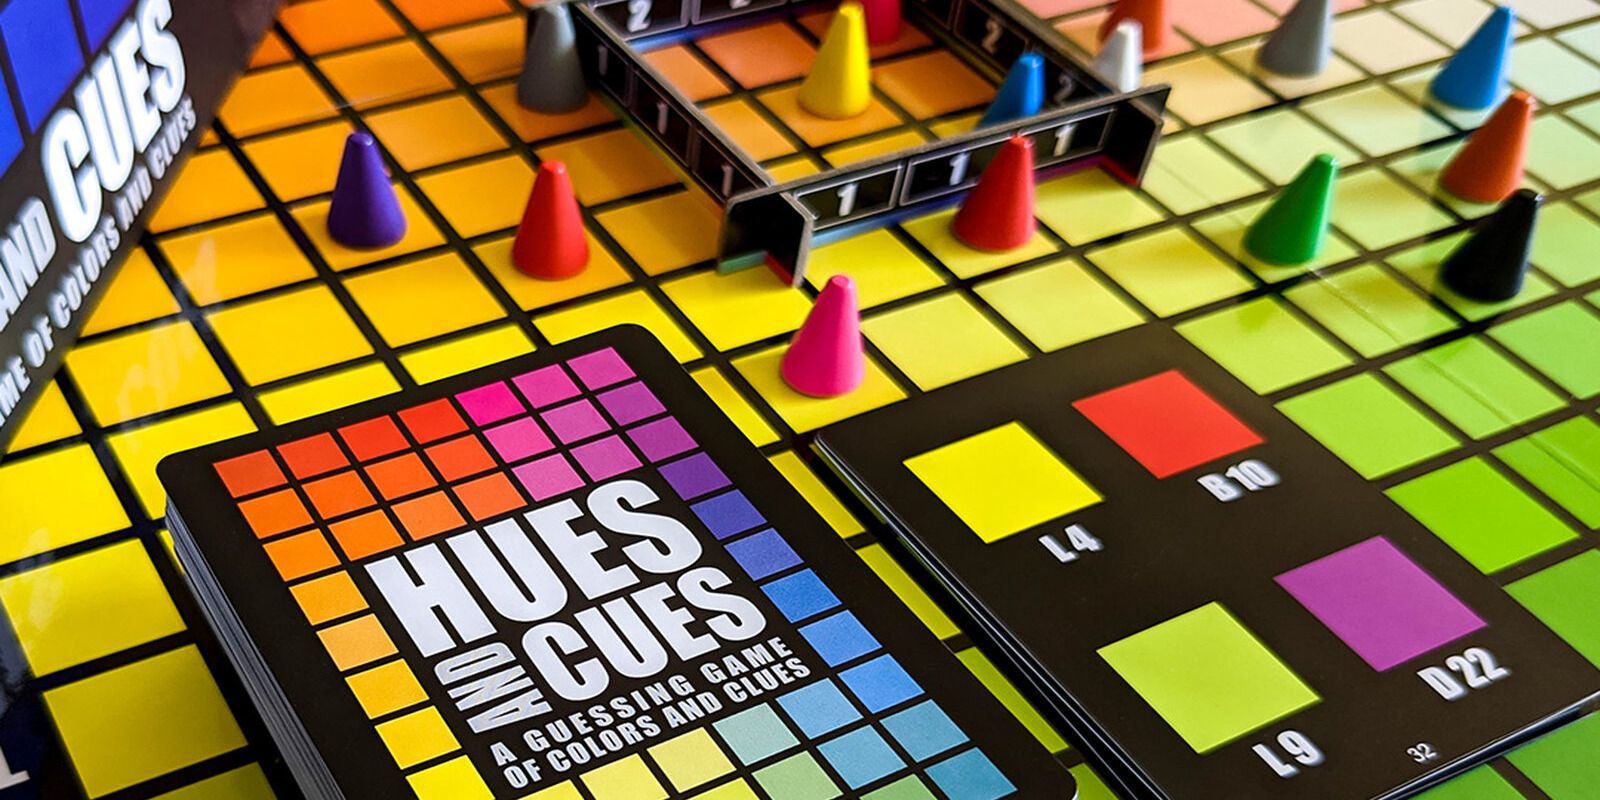 hues-and-cues-board-game